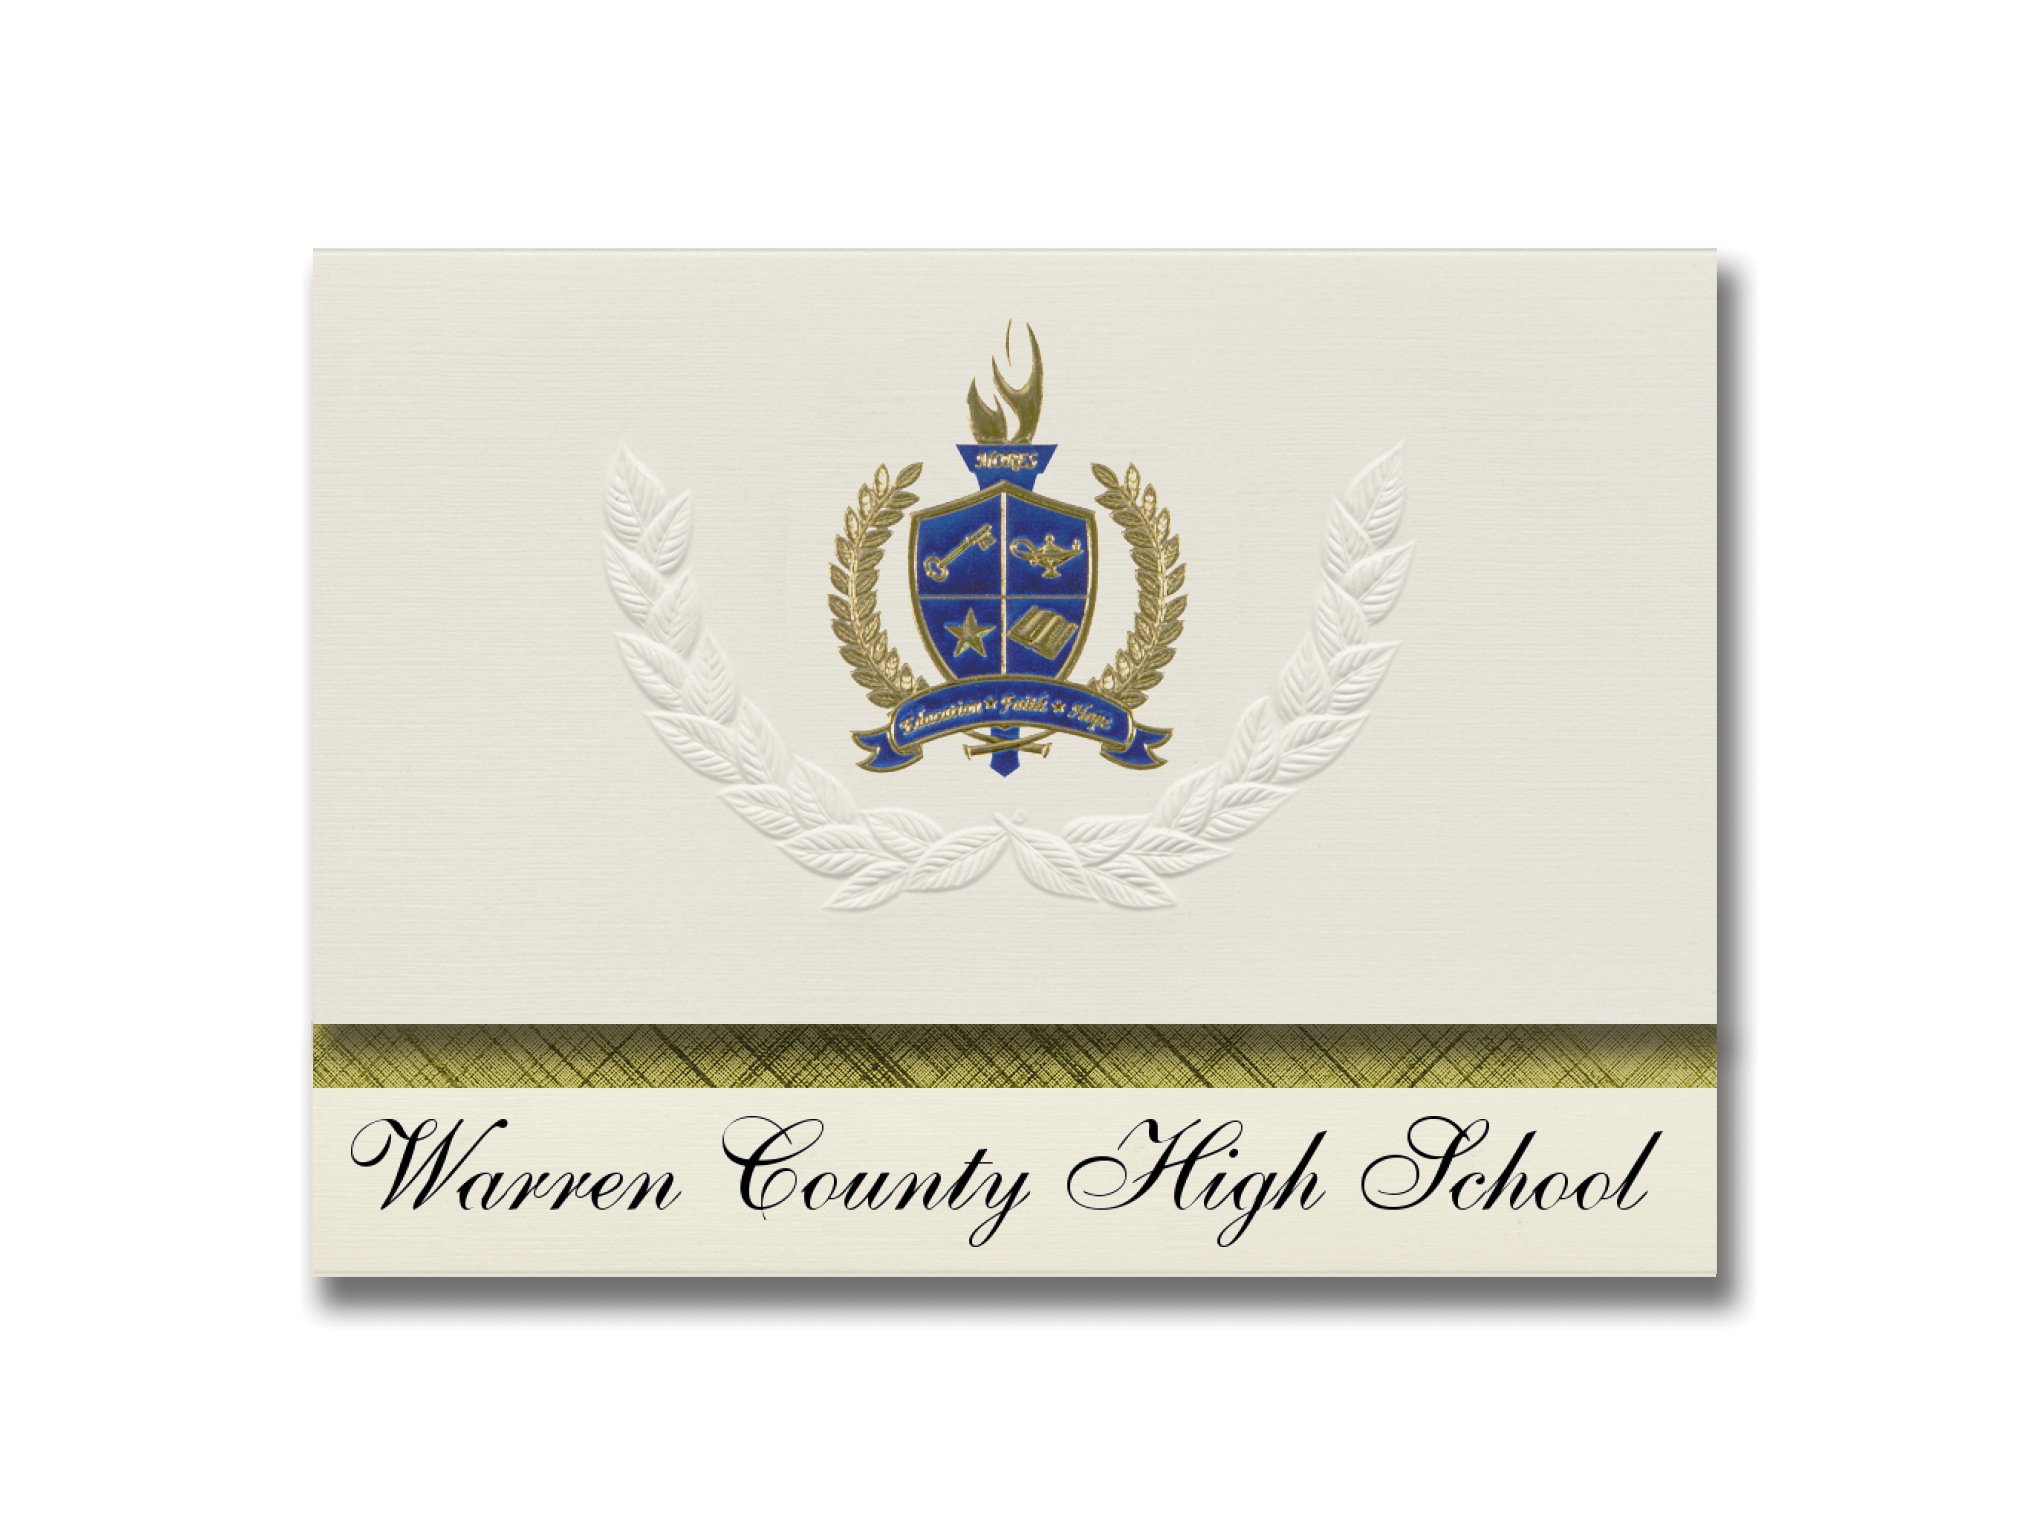 Signature Announcements Warren County High School (Warrenton, GA) Graduation Announcements, Presidential style, Elite package of 25 with Gold & Blu...